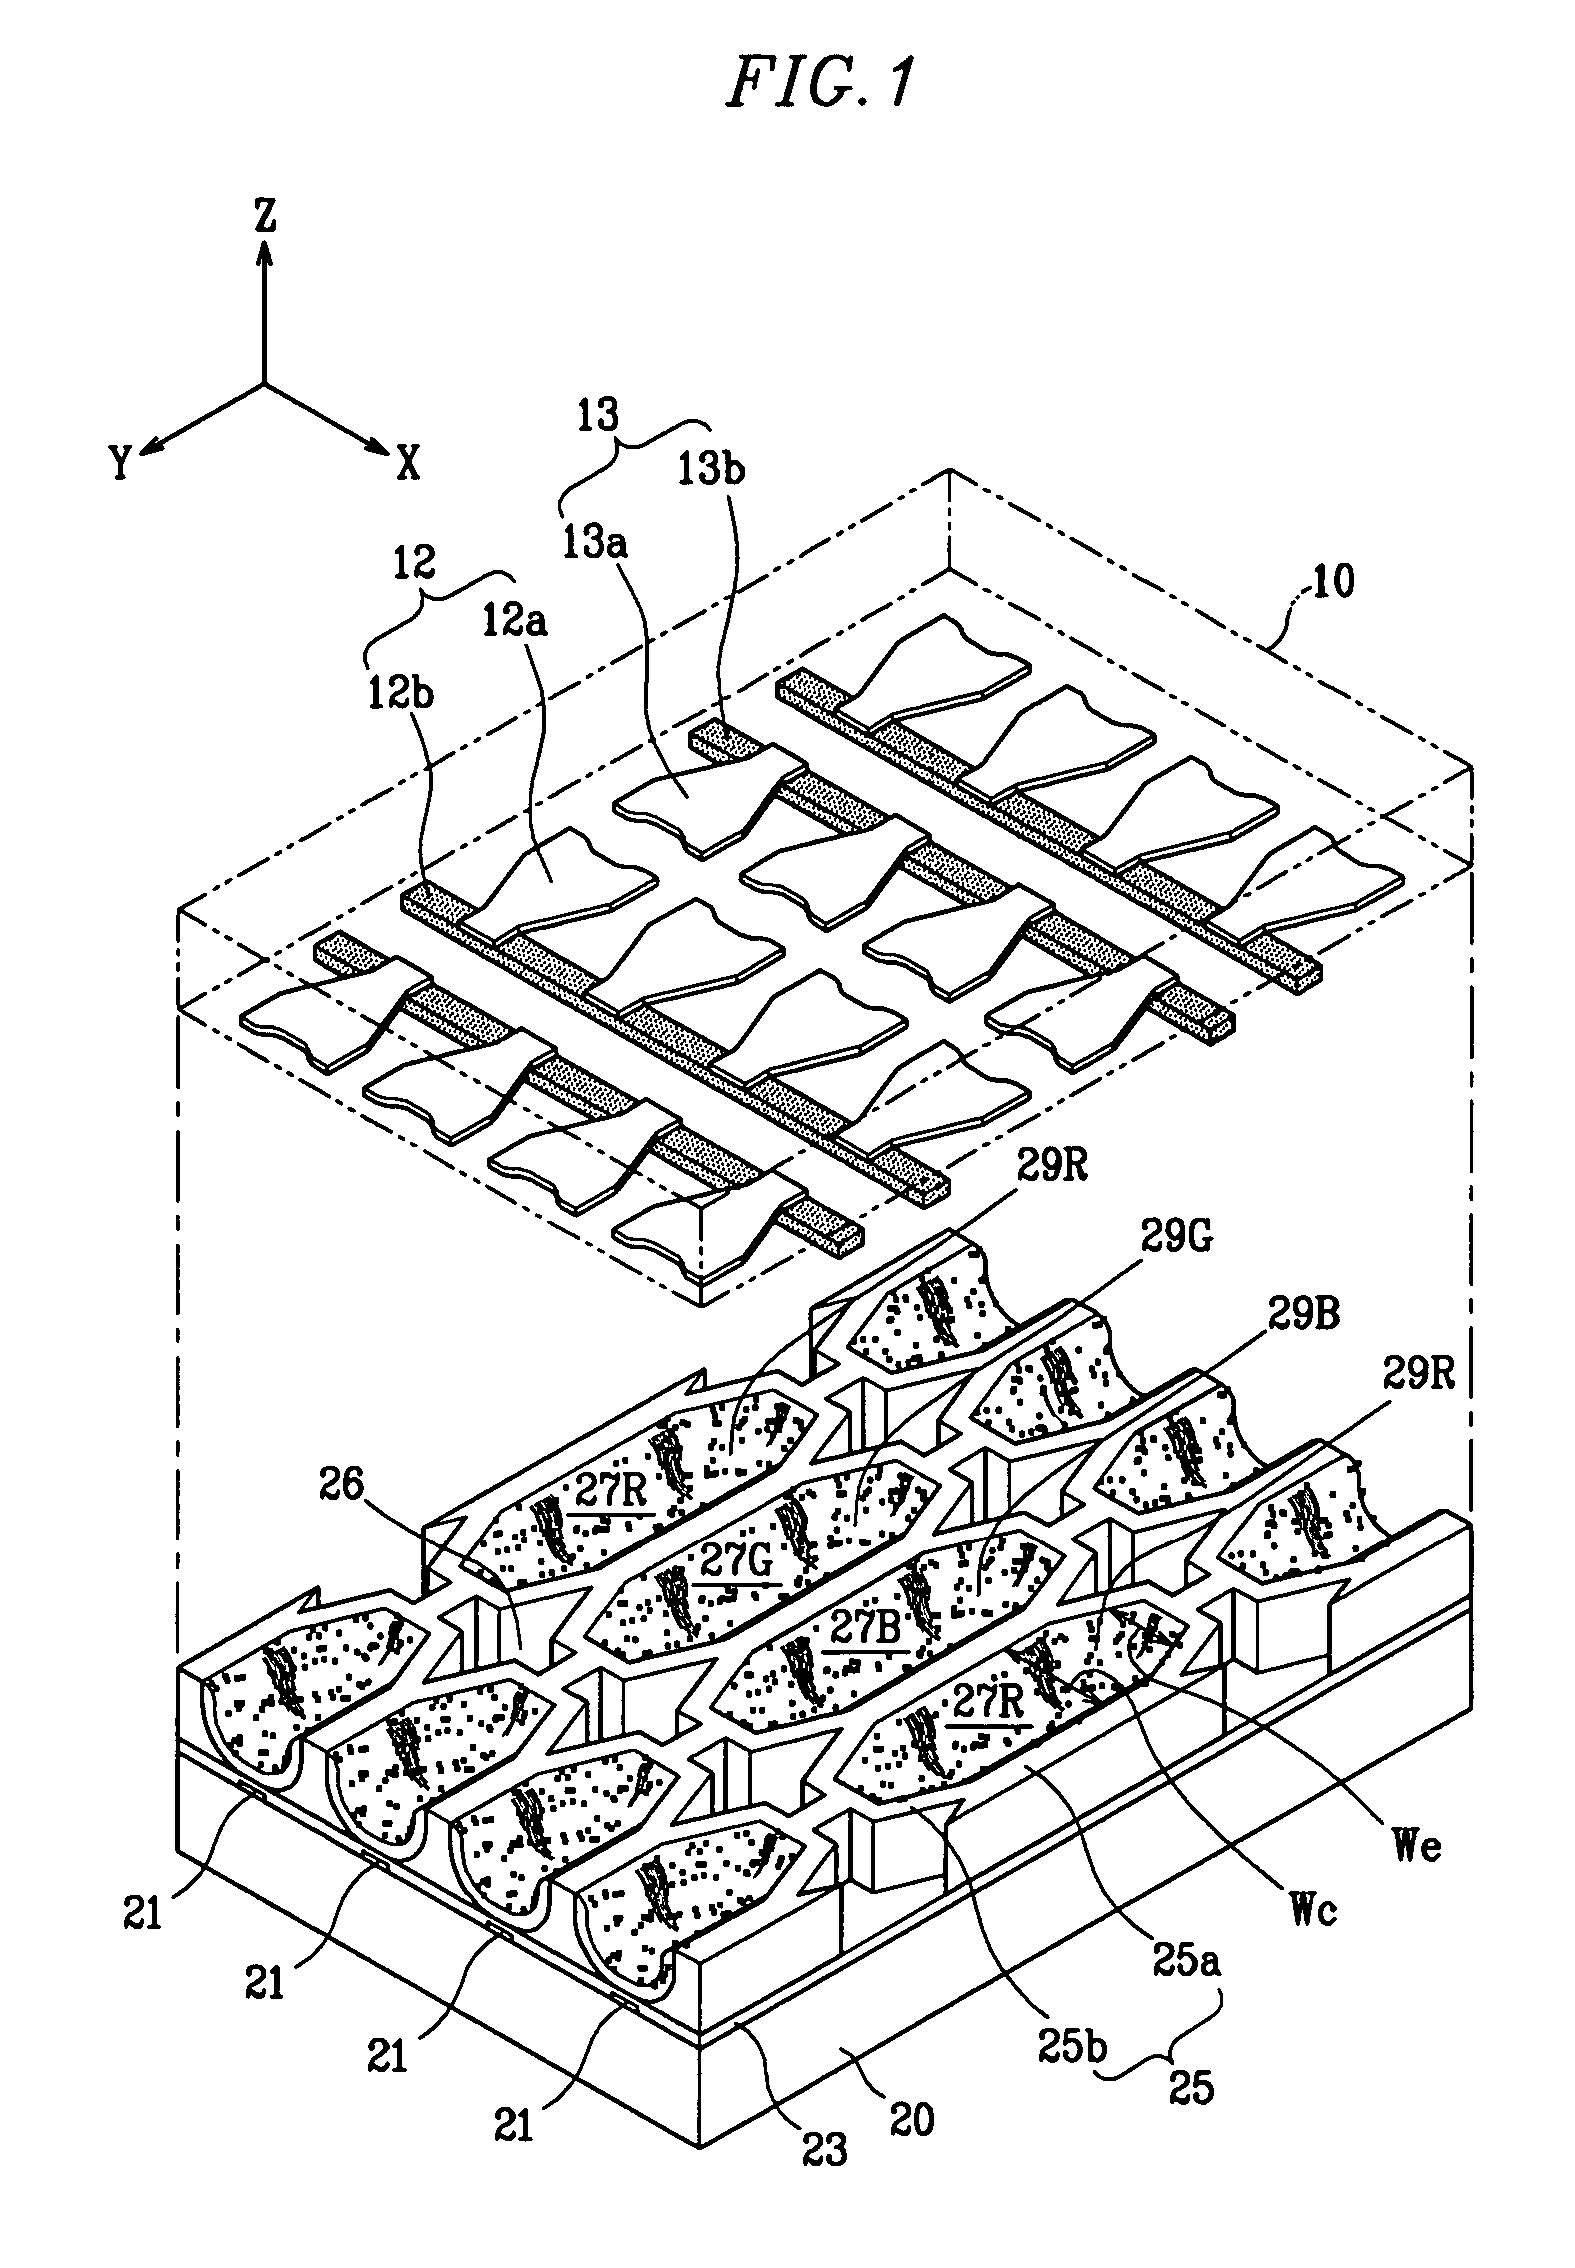 Plasma display panel having extension electrode with specific shape to increase discharge efficiency